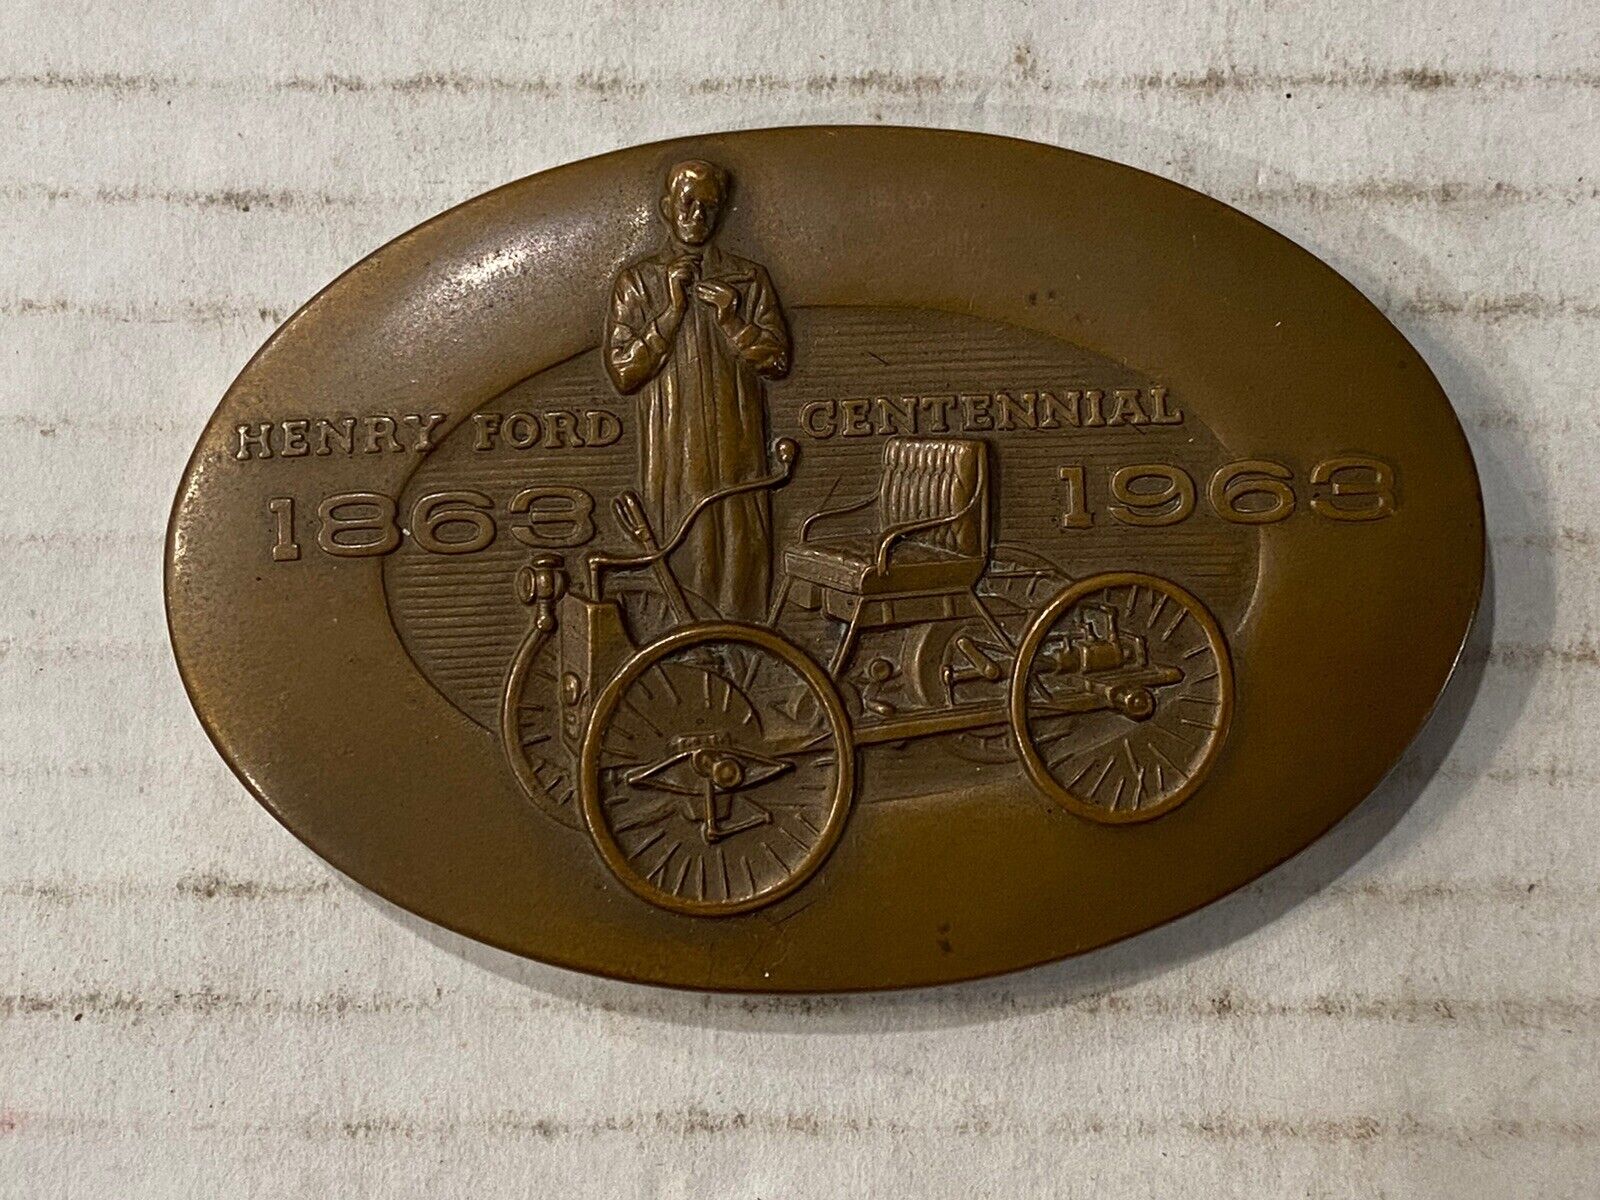 Ford Issued Bronze Centennial Paperweight 1863 - 1963